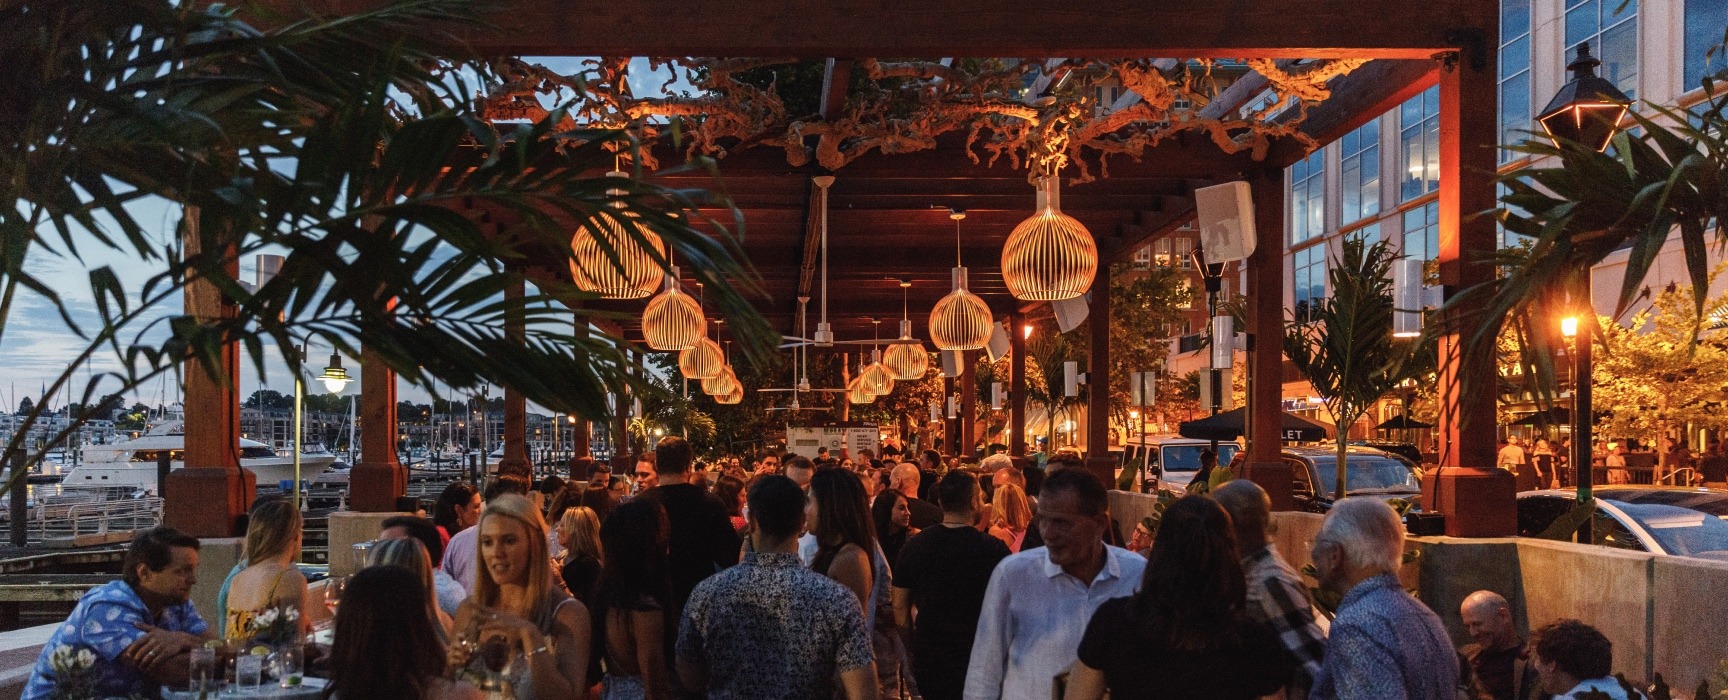 Dimly lit outdoor chic bar packed with people and surrounded by tropical greenery